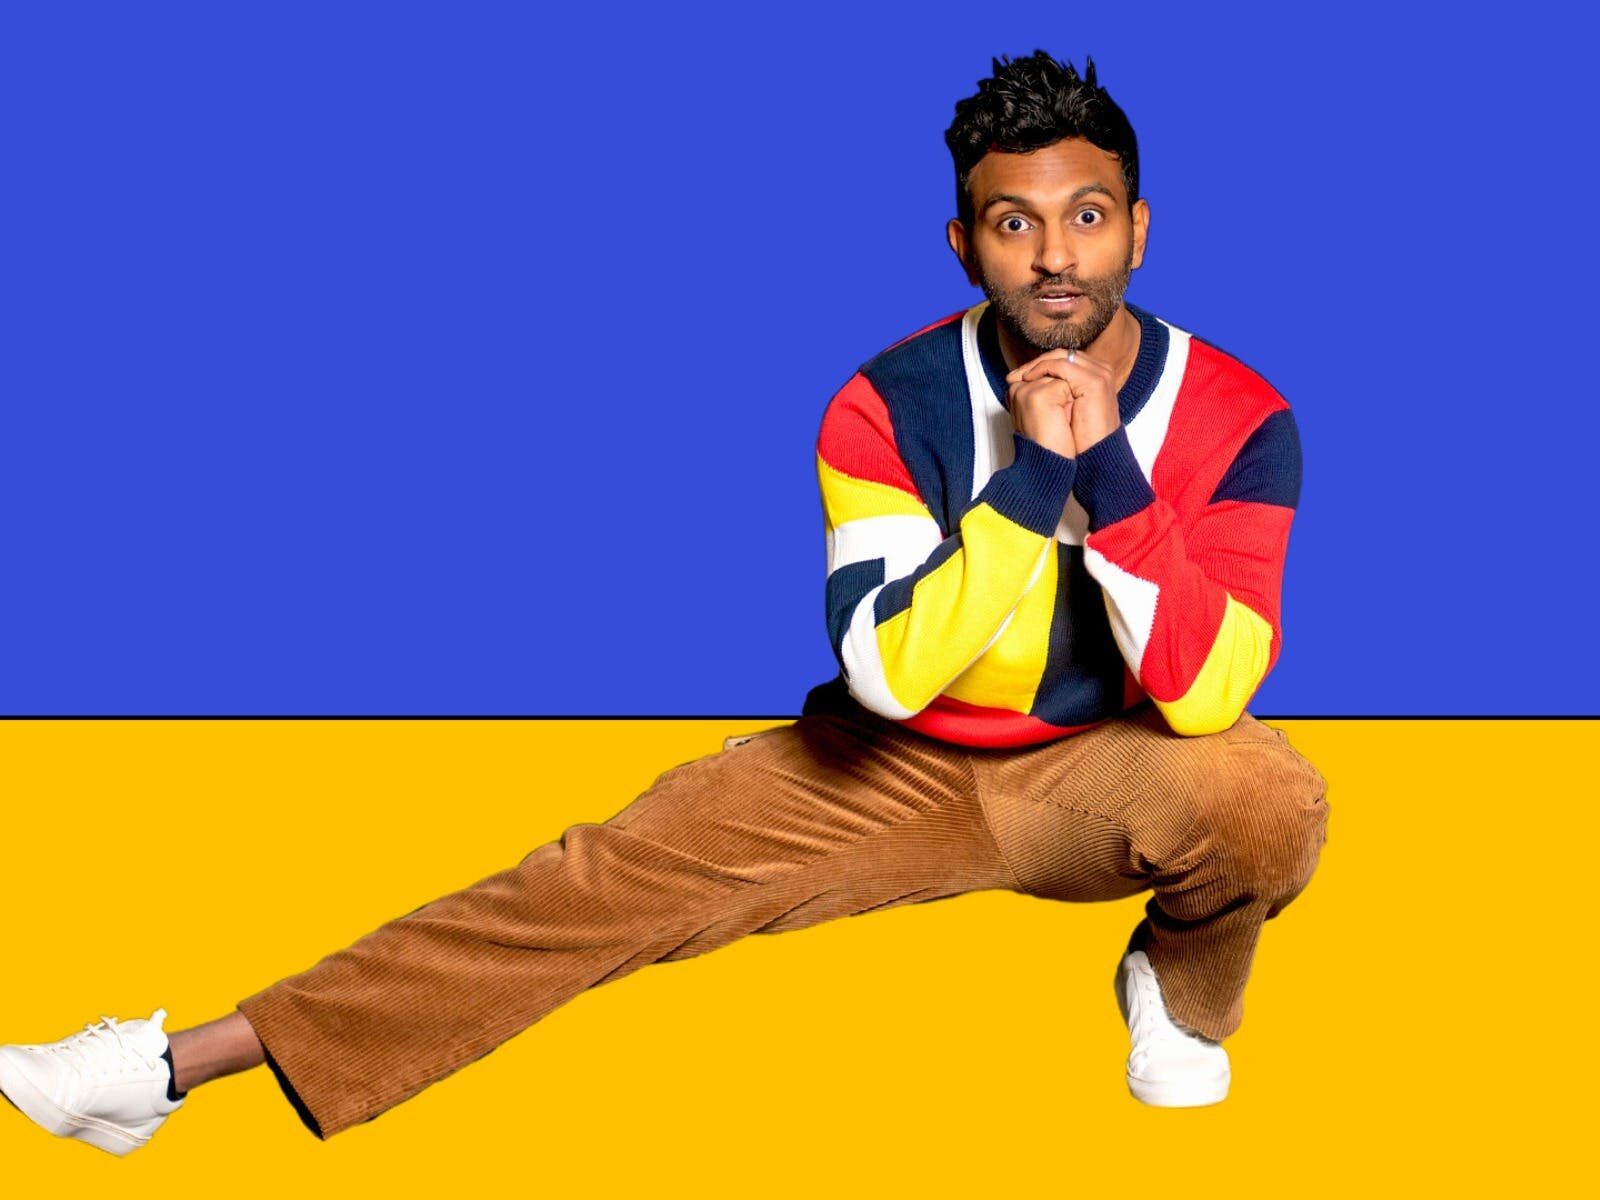 Man crouching with right leg extended out in front of blue and yellow backdrop